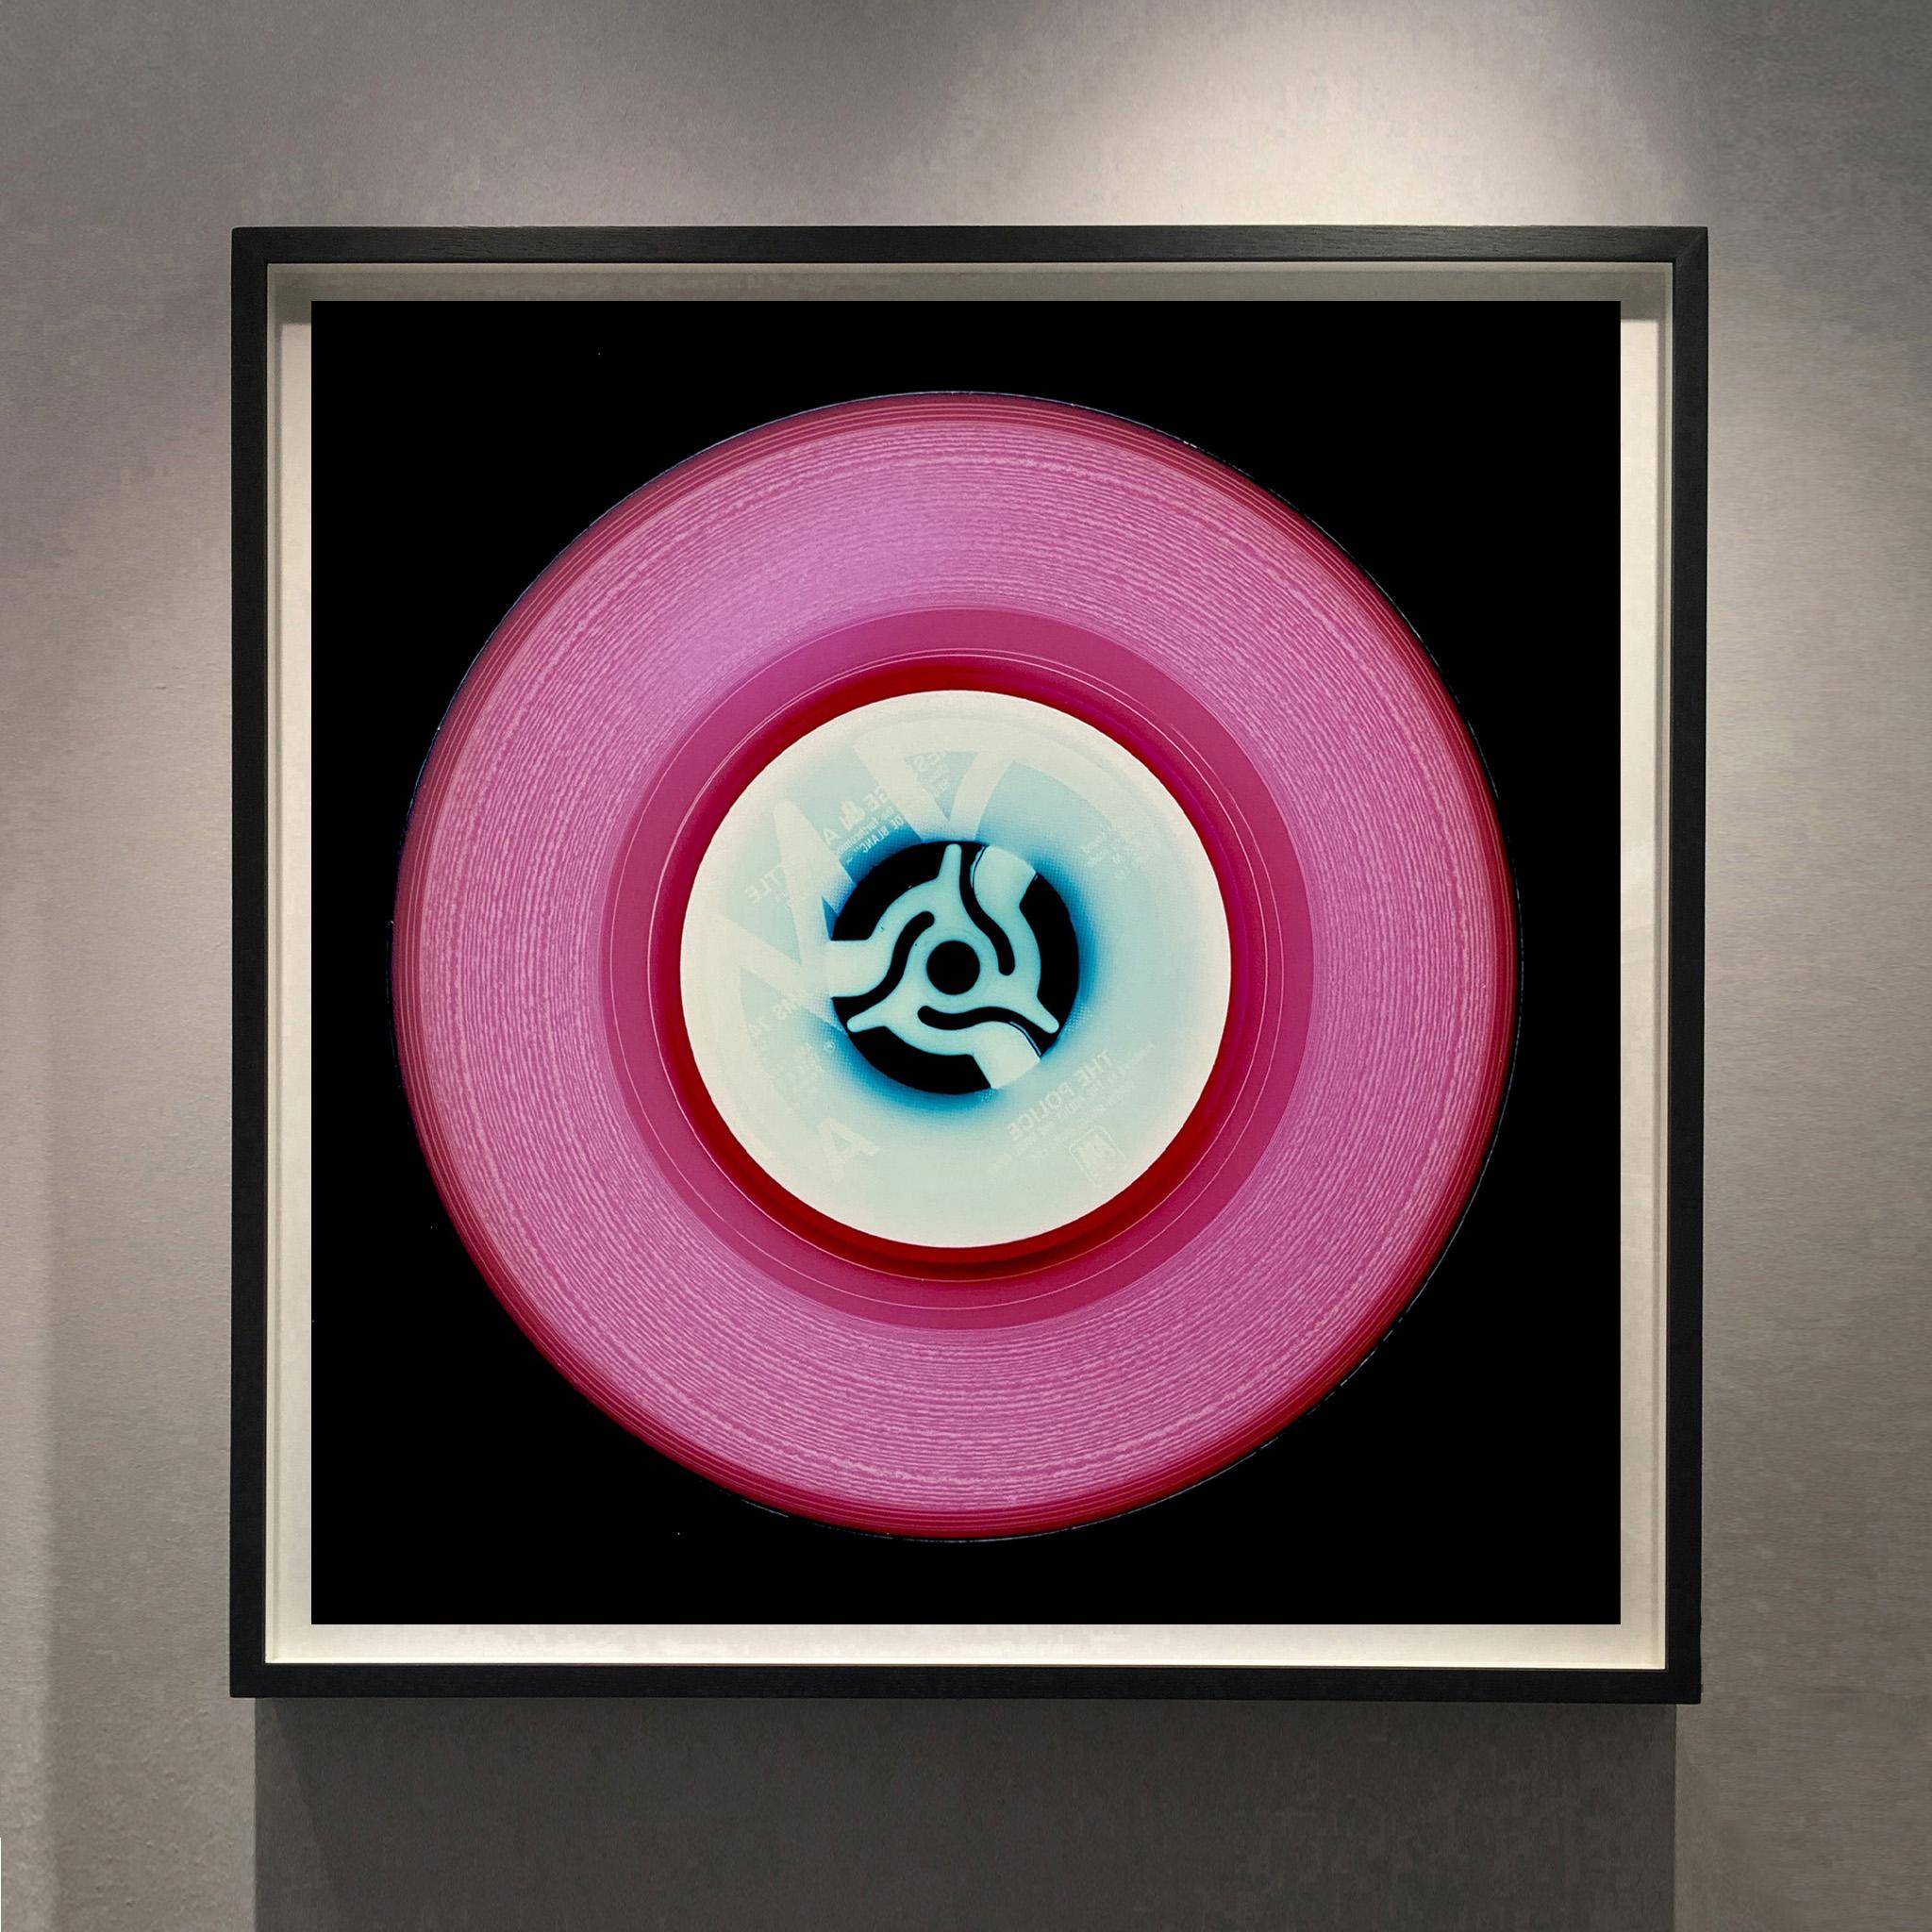 Vinyl Collection - Pink, Blue, Purple Trio - Pop Art Color Photography - Print by Heidler & Heeps